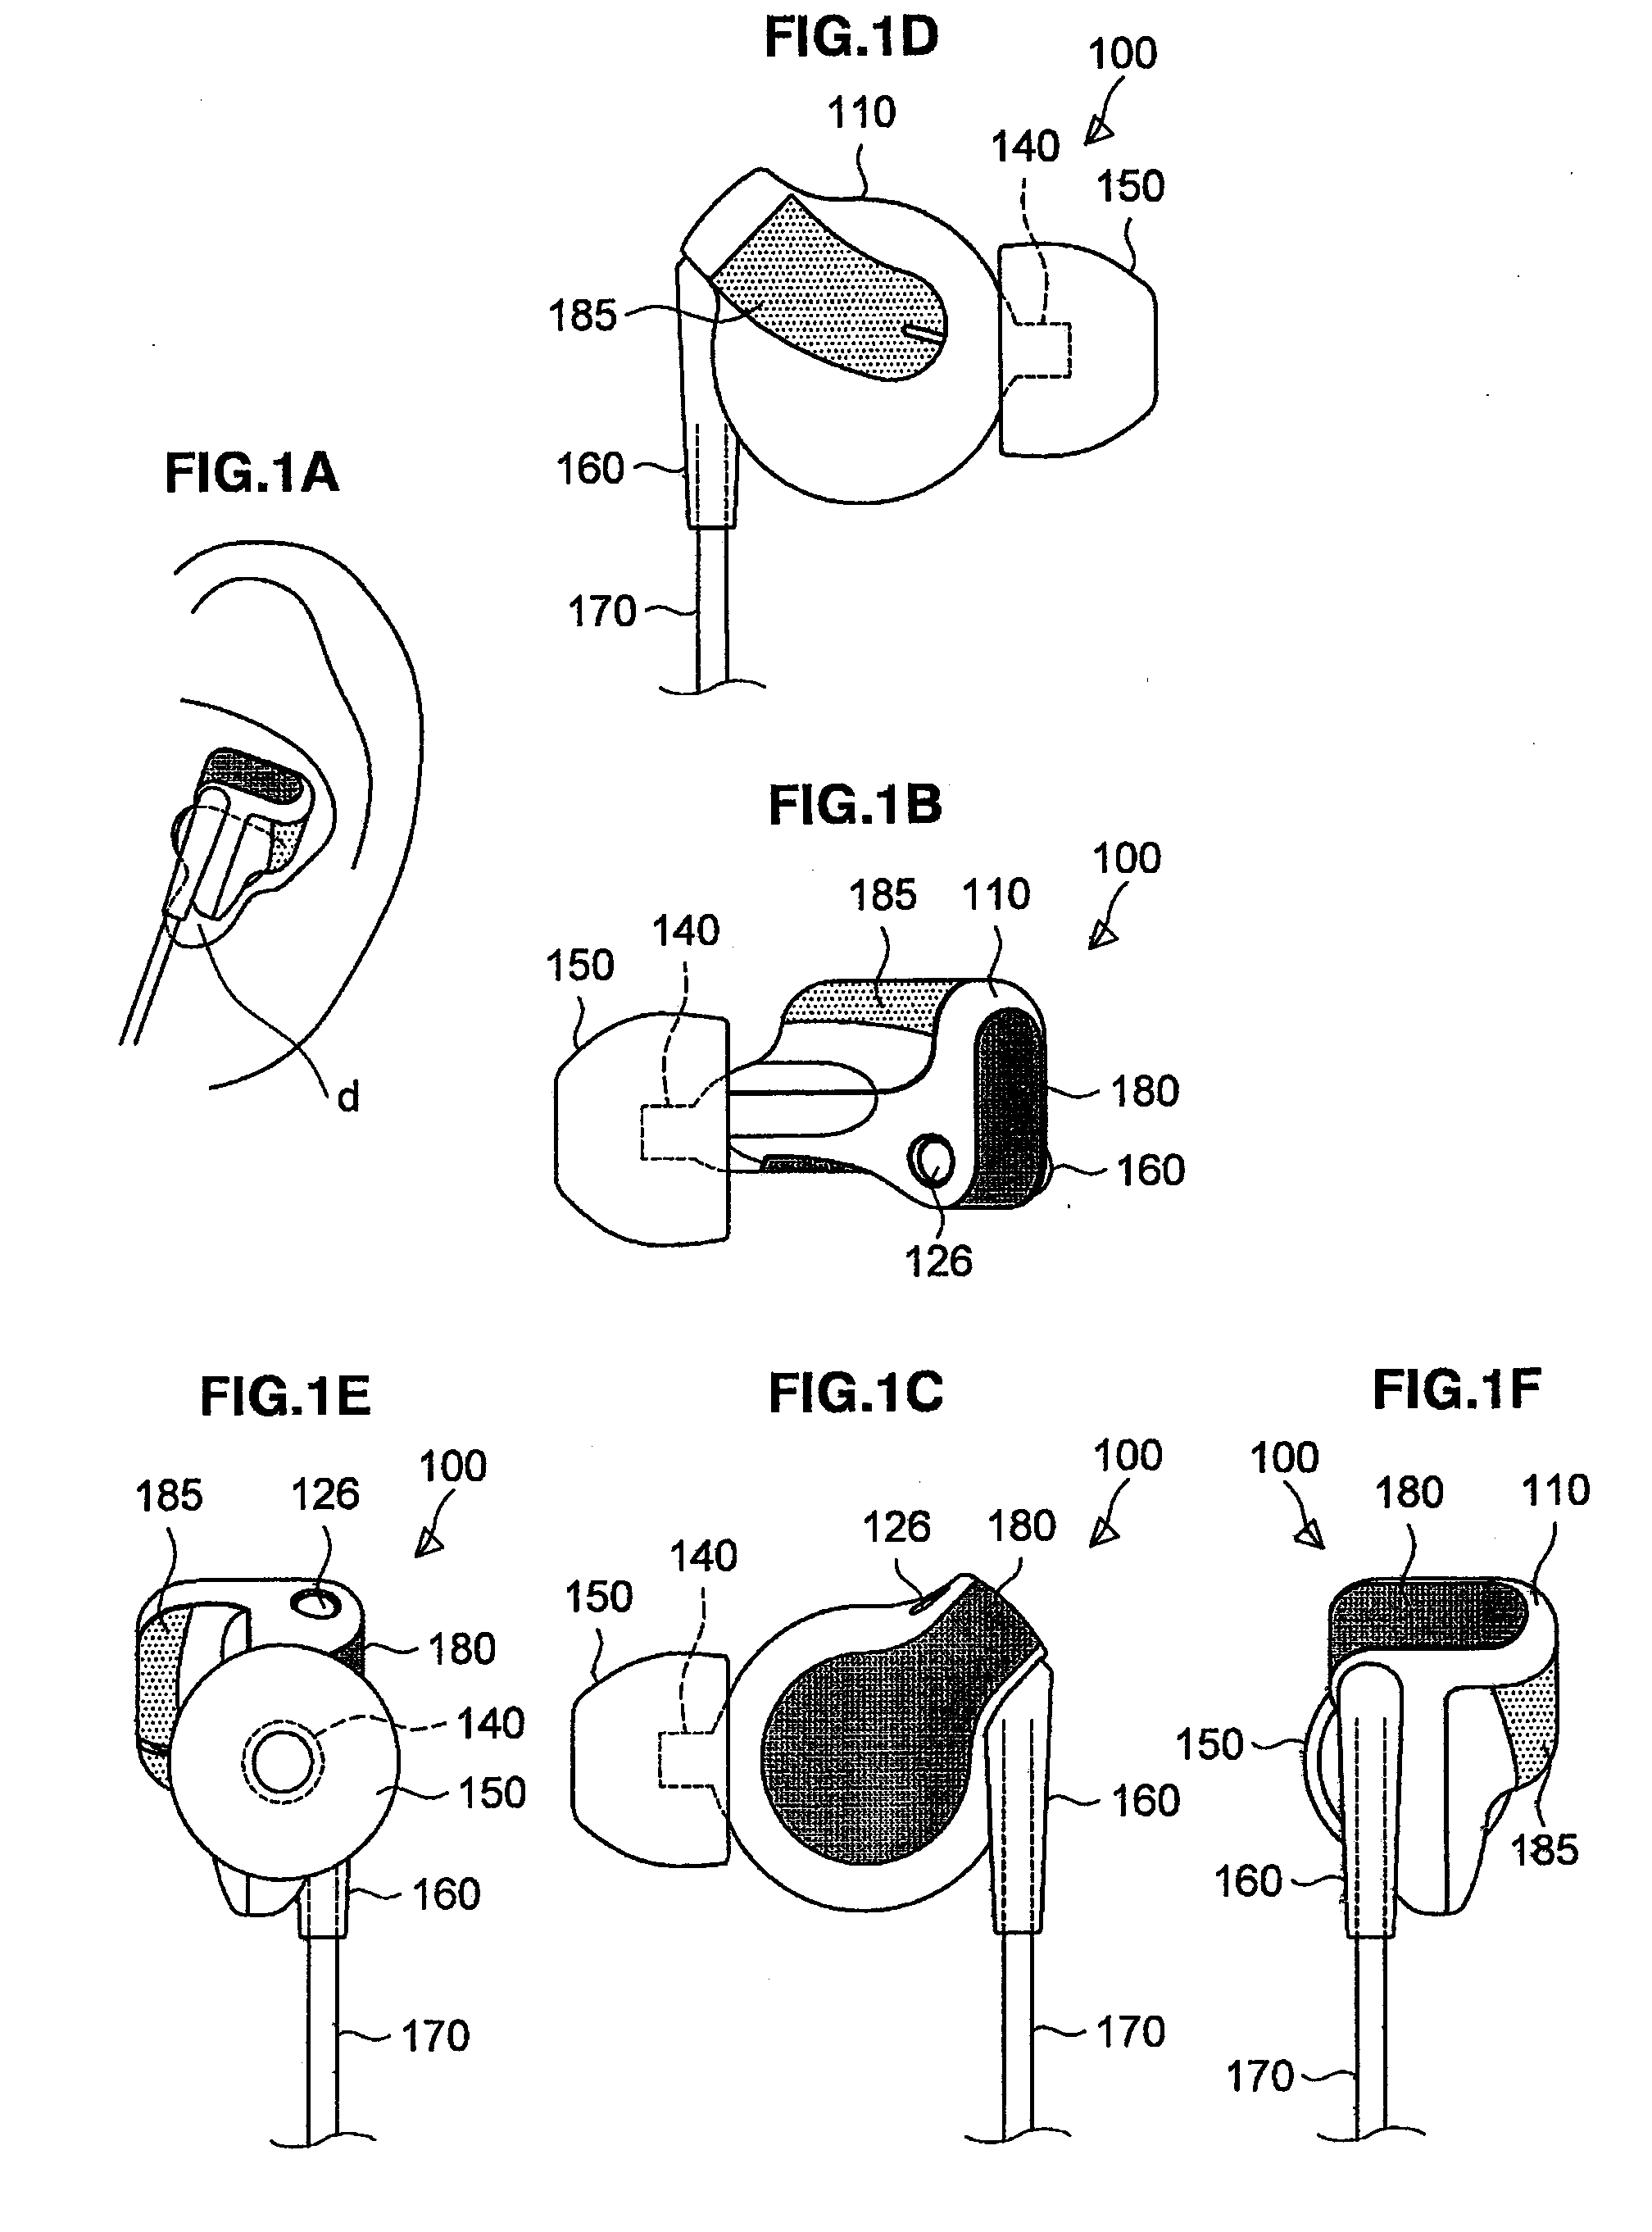 Earpiece and Electro-Acoustic Transducer